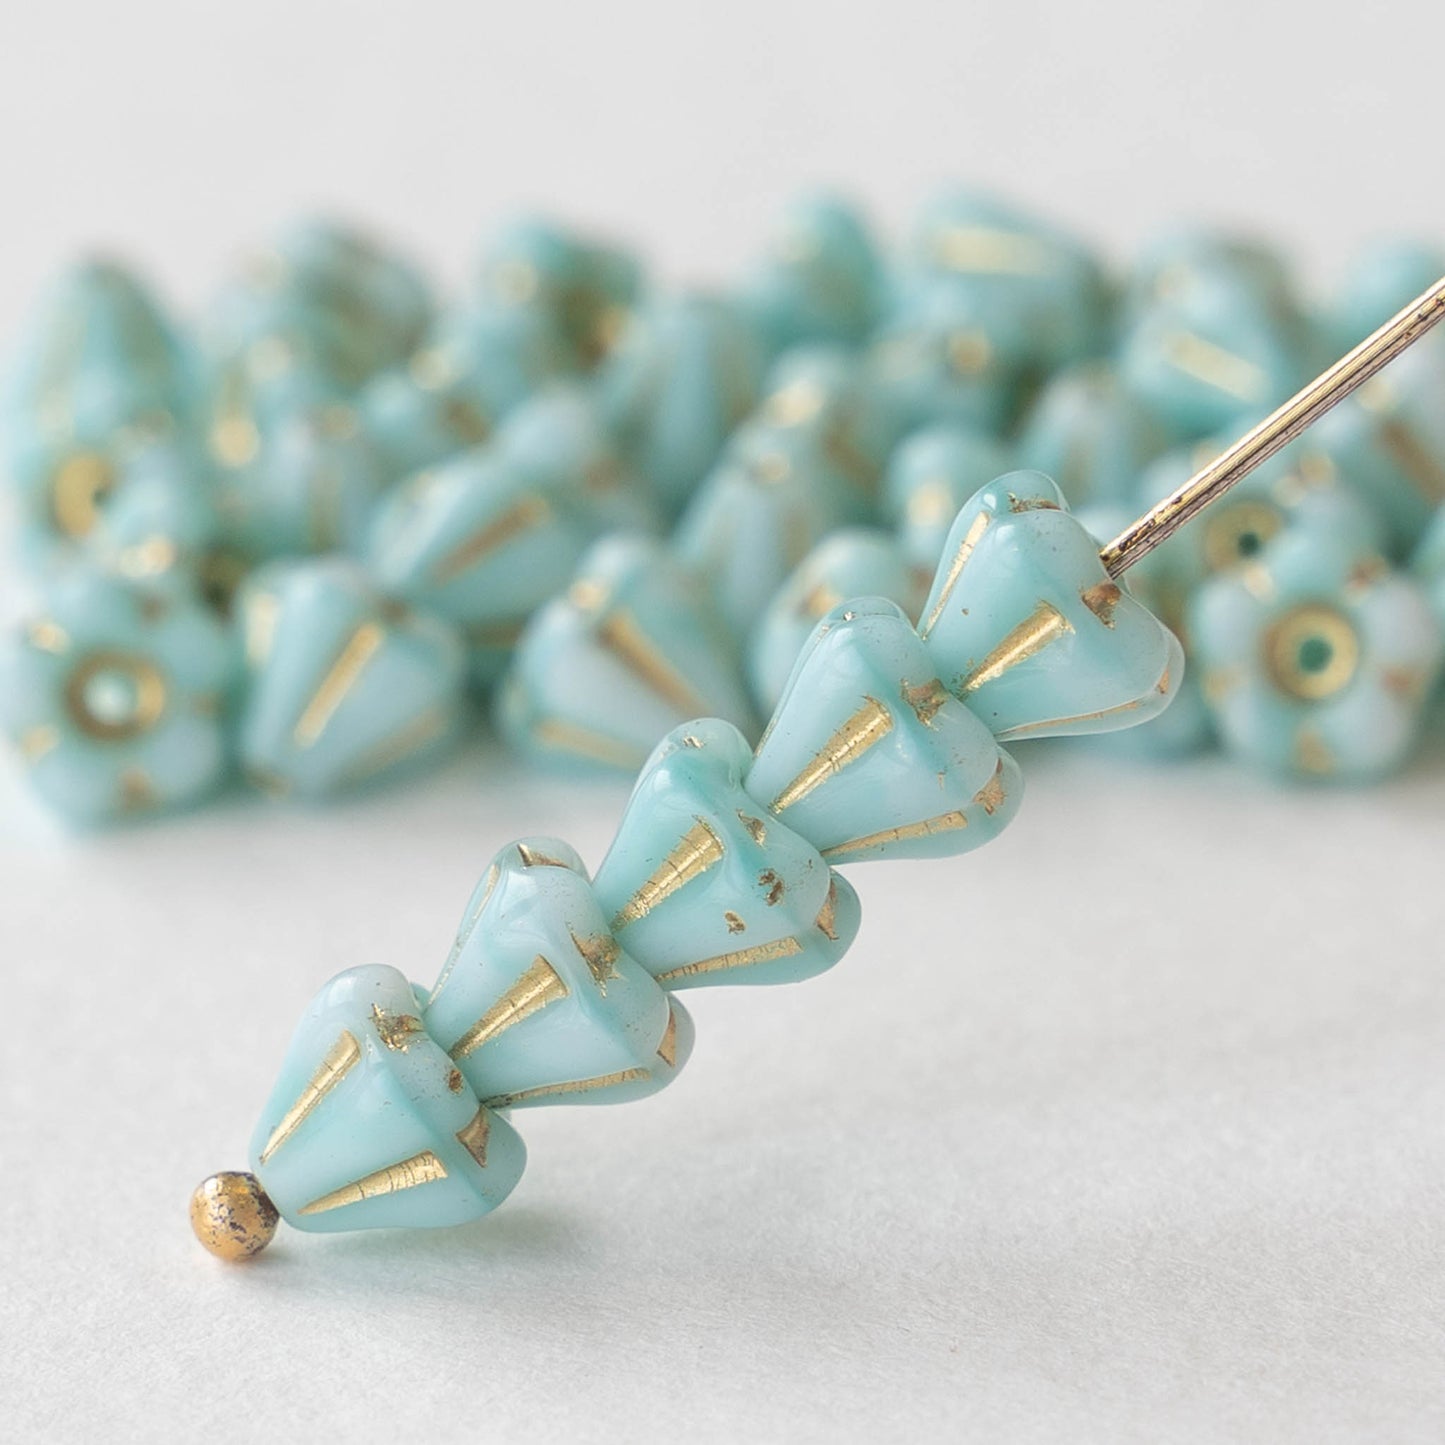 4x6mm Bell Flower Beads -  Lt Aqua with Gold Wash- 30 Beads